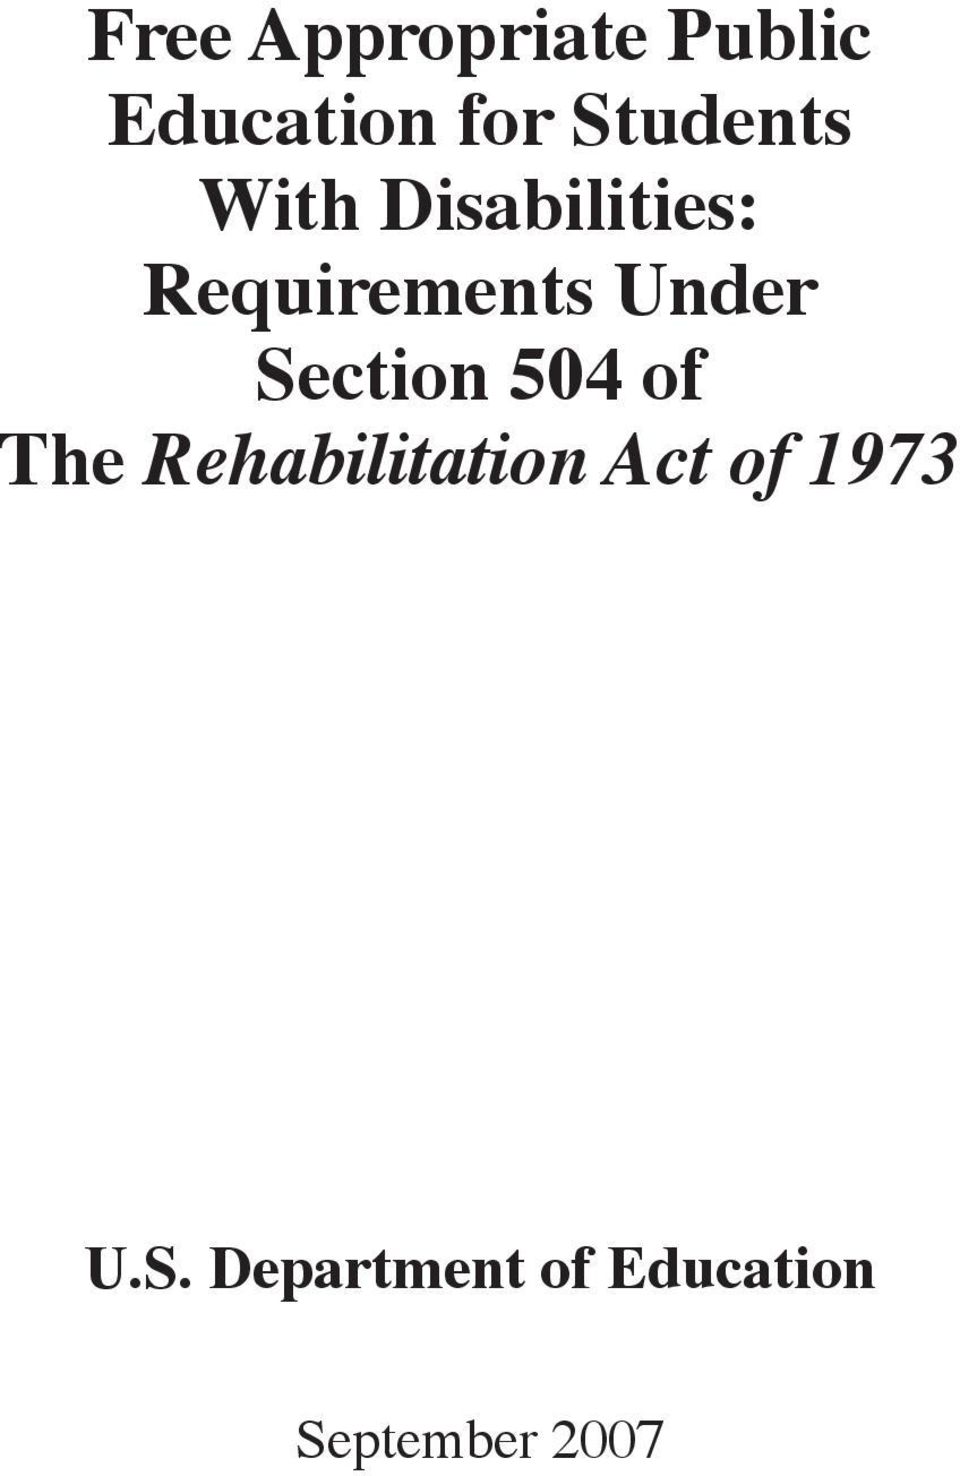 Under Section 504 of The Rehabilitation Act